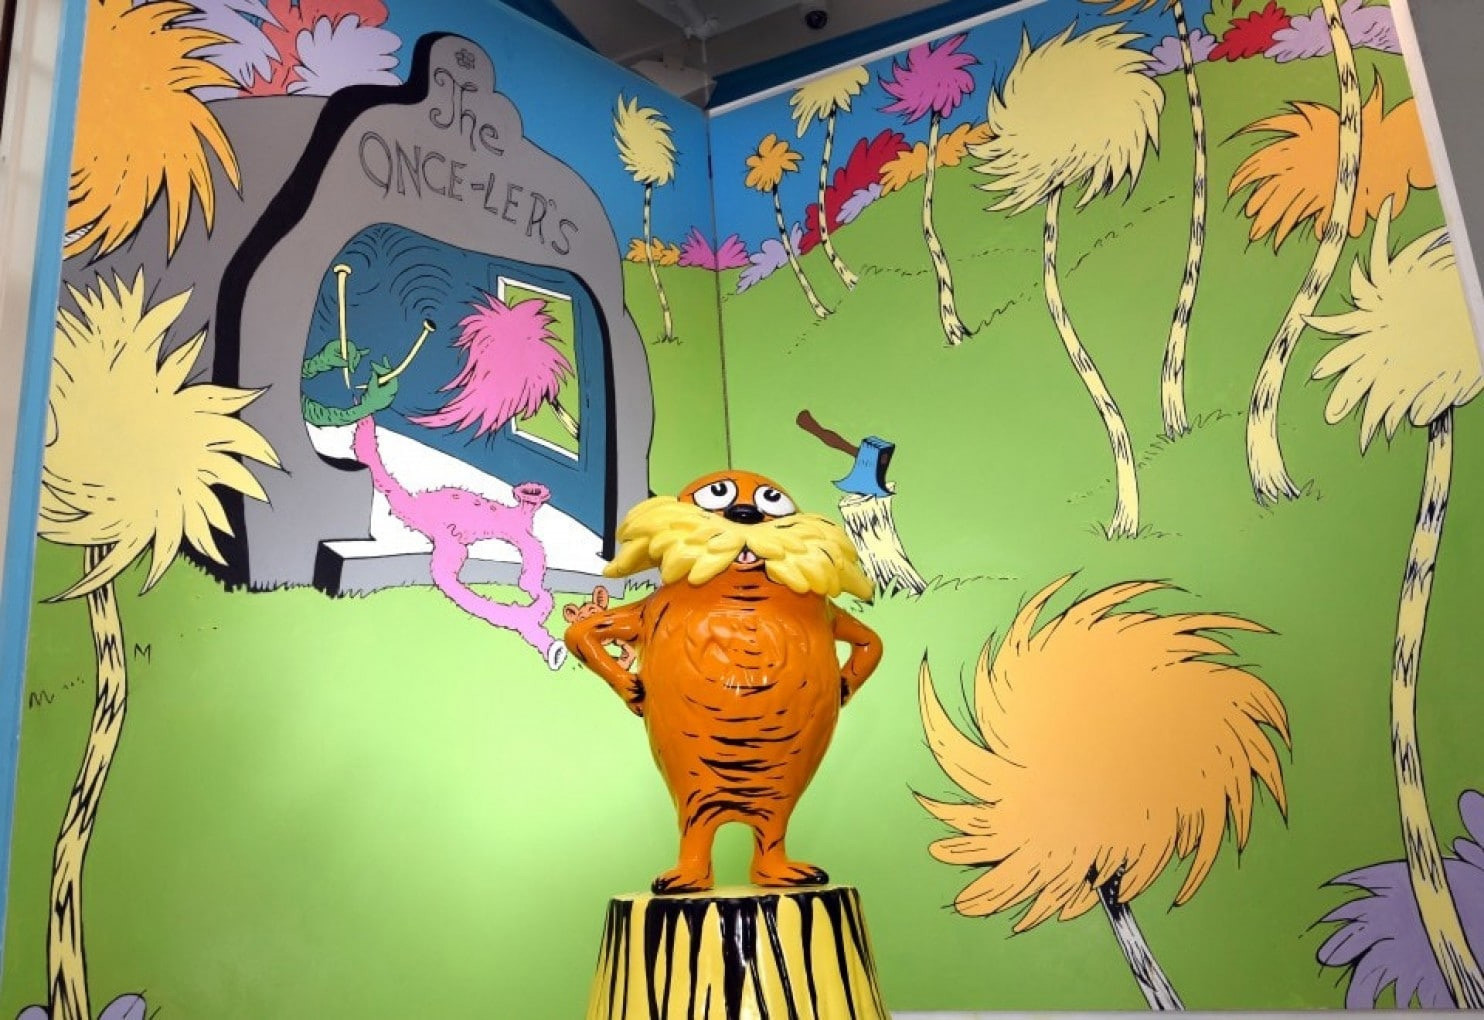 Dr. Seuss museum to replace mural after complaints it depicted 'jarring